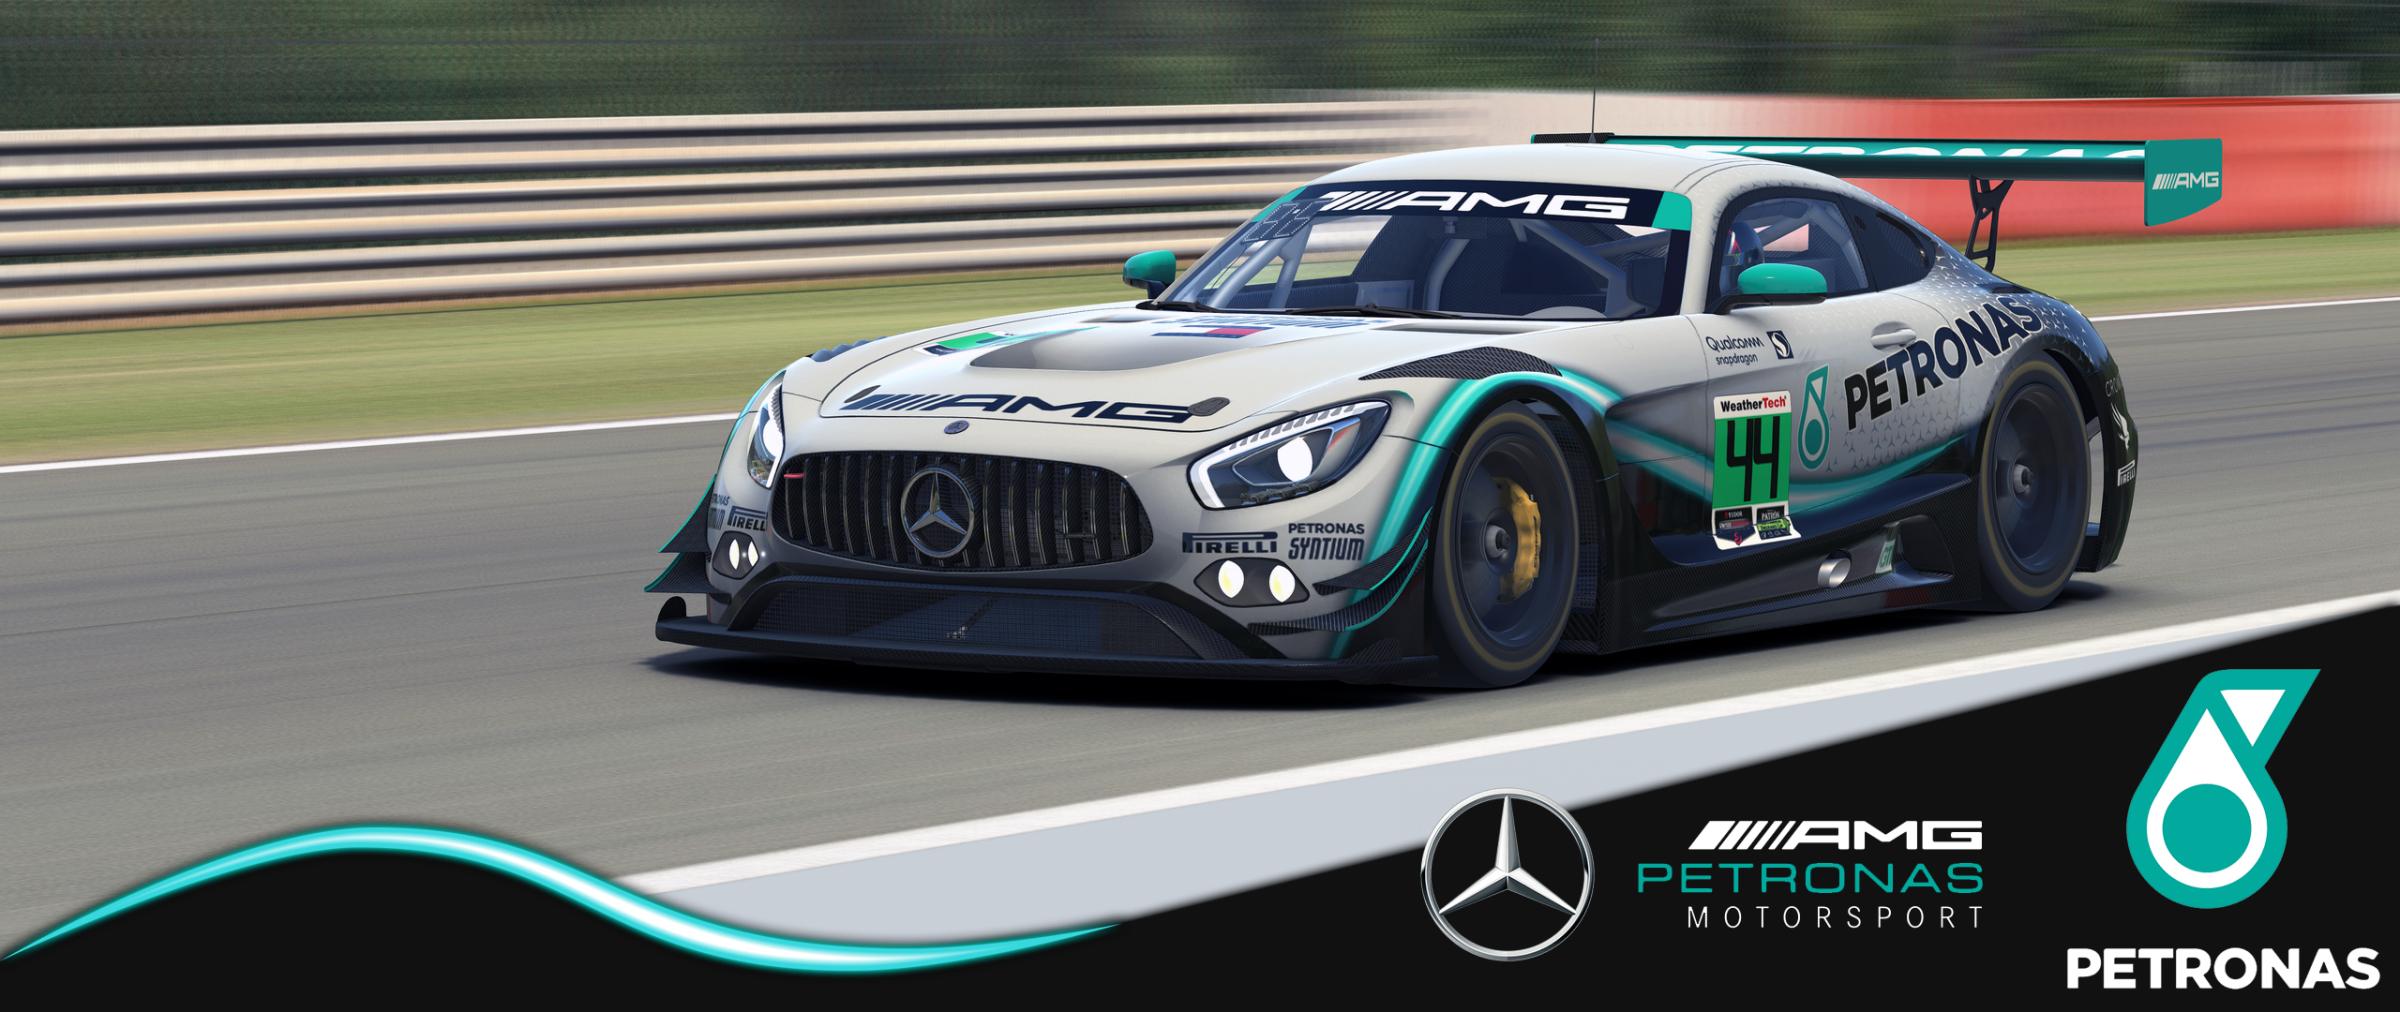 Preview of AMG Petronas Motorsport (2019) - Petronas by Timothy Collier